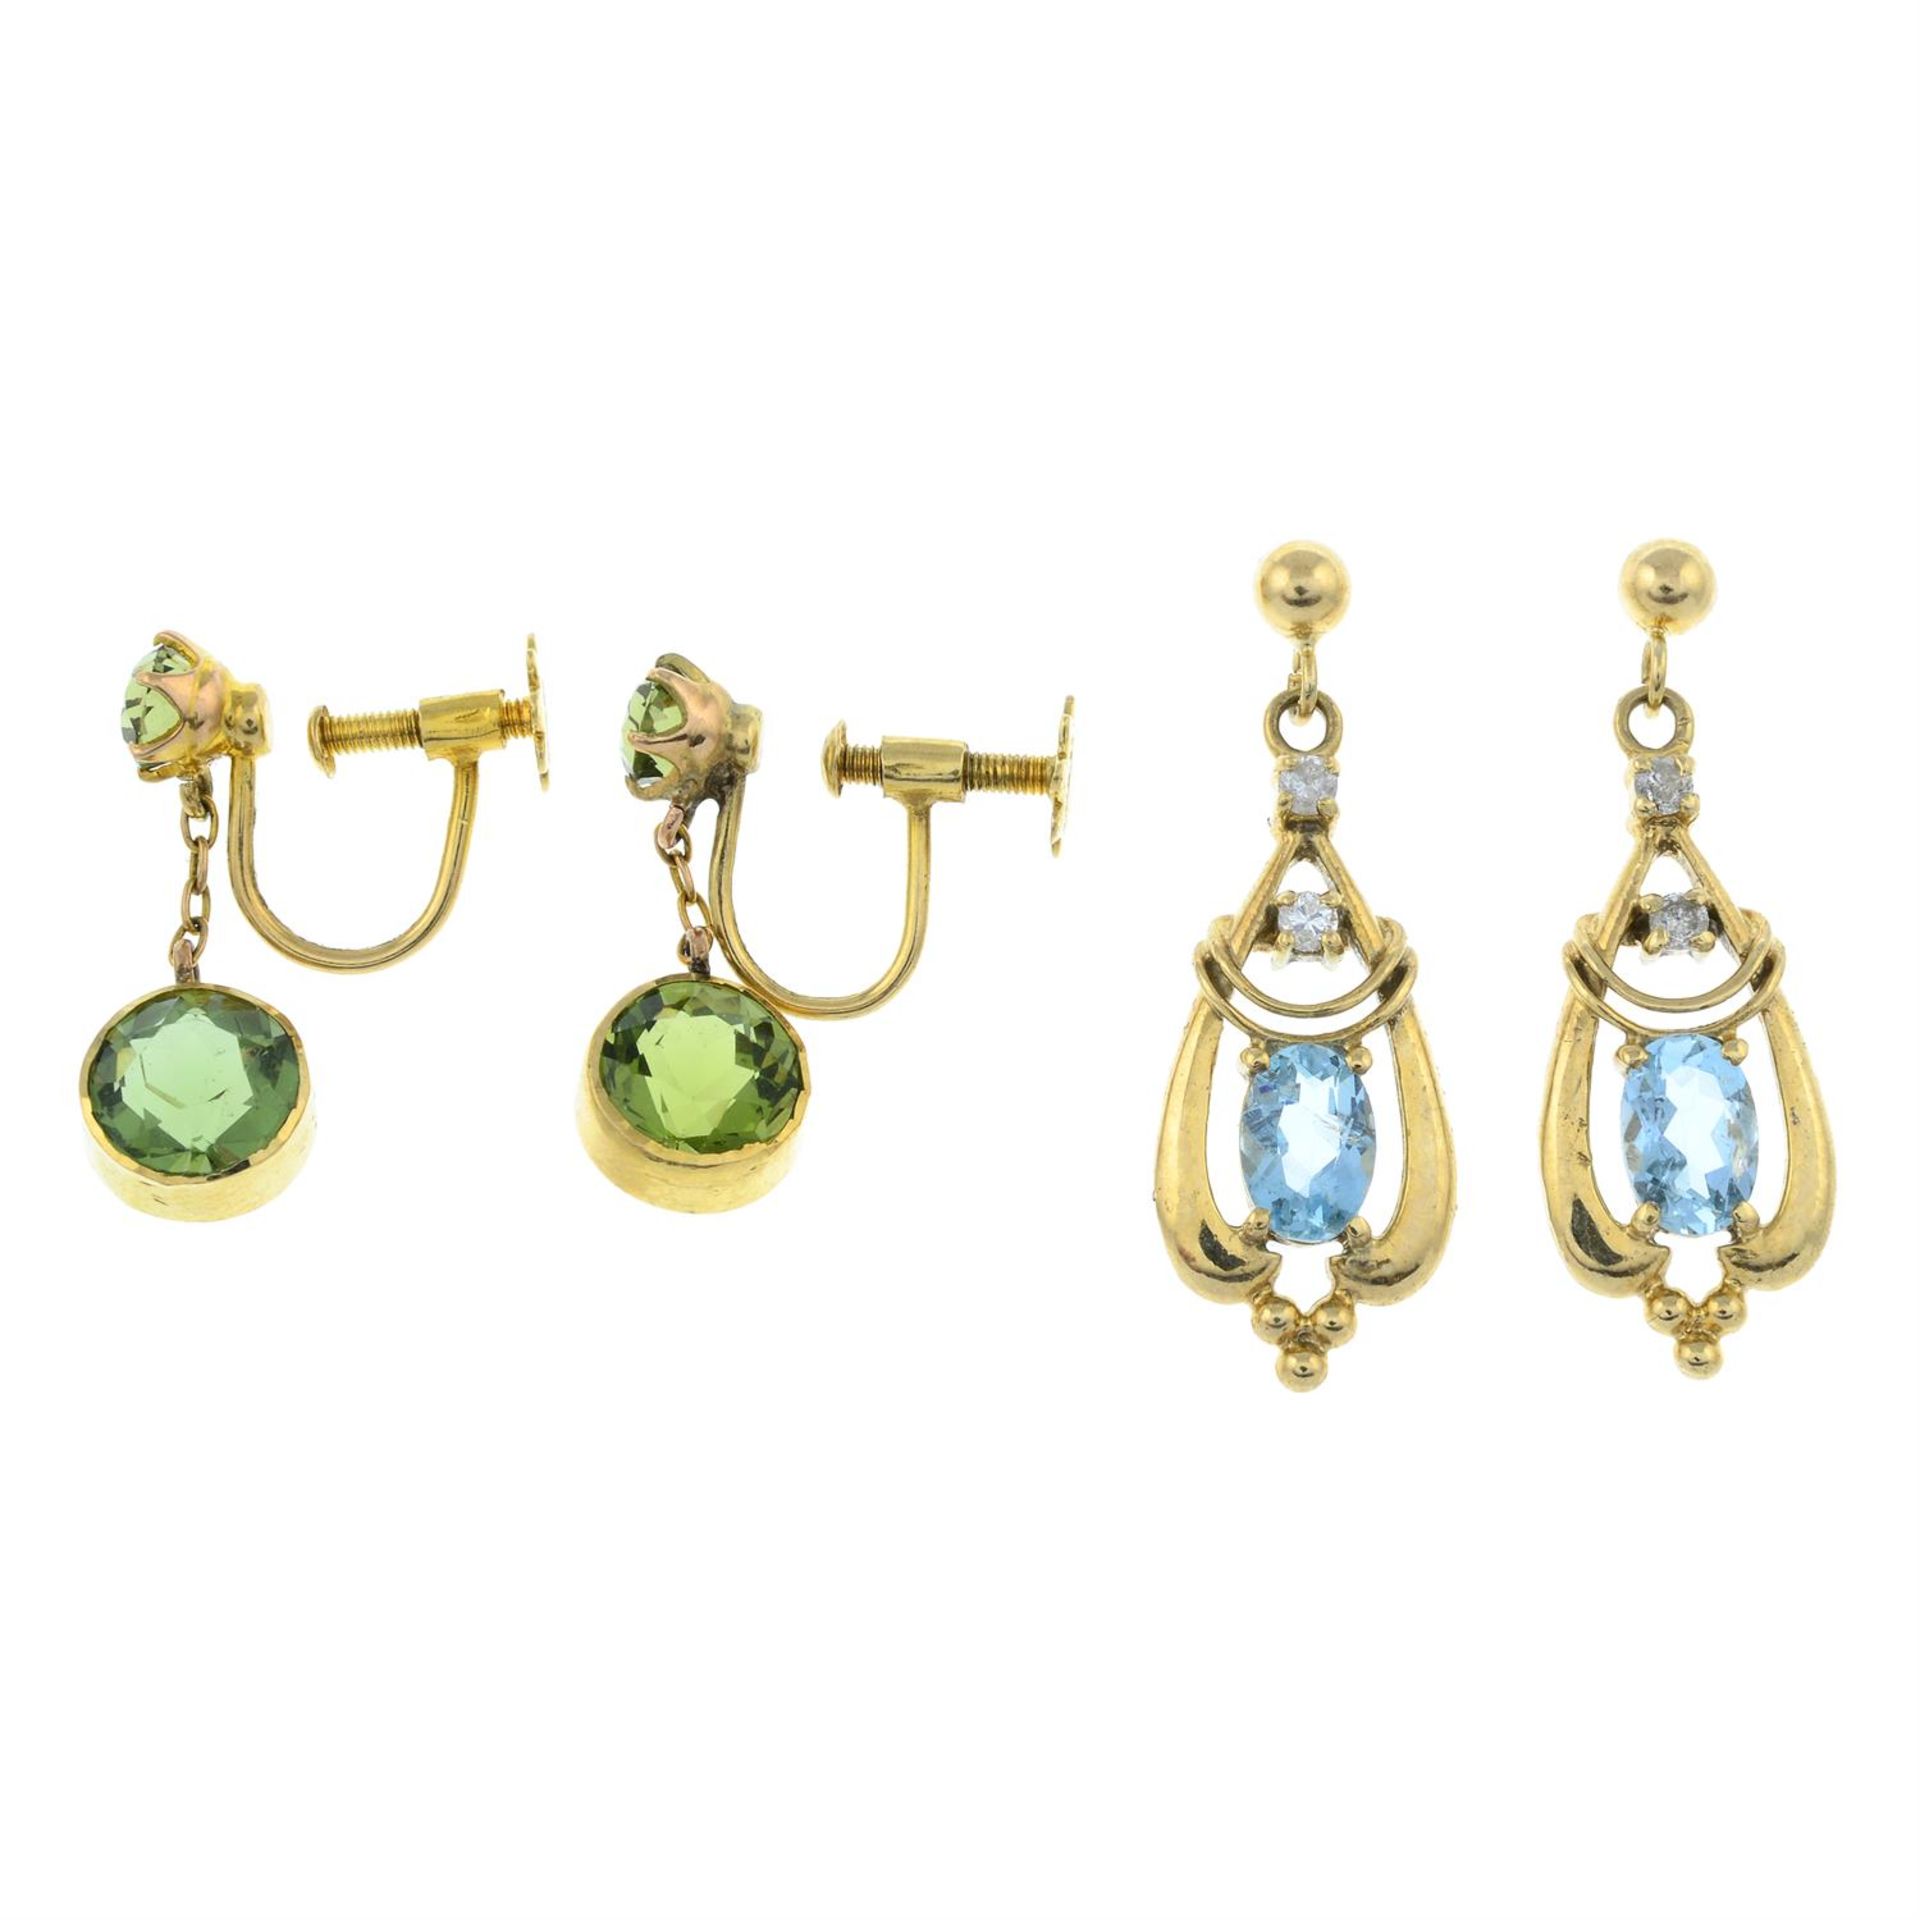 A pair of peridot drop screw-back earrings, together with a pair of aquamarine and brilliant-cut